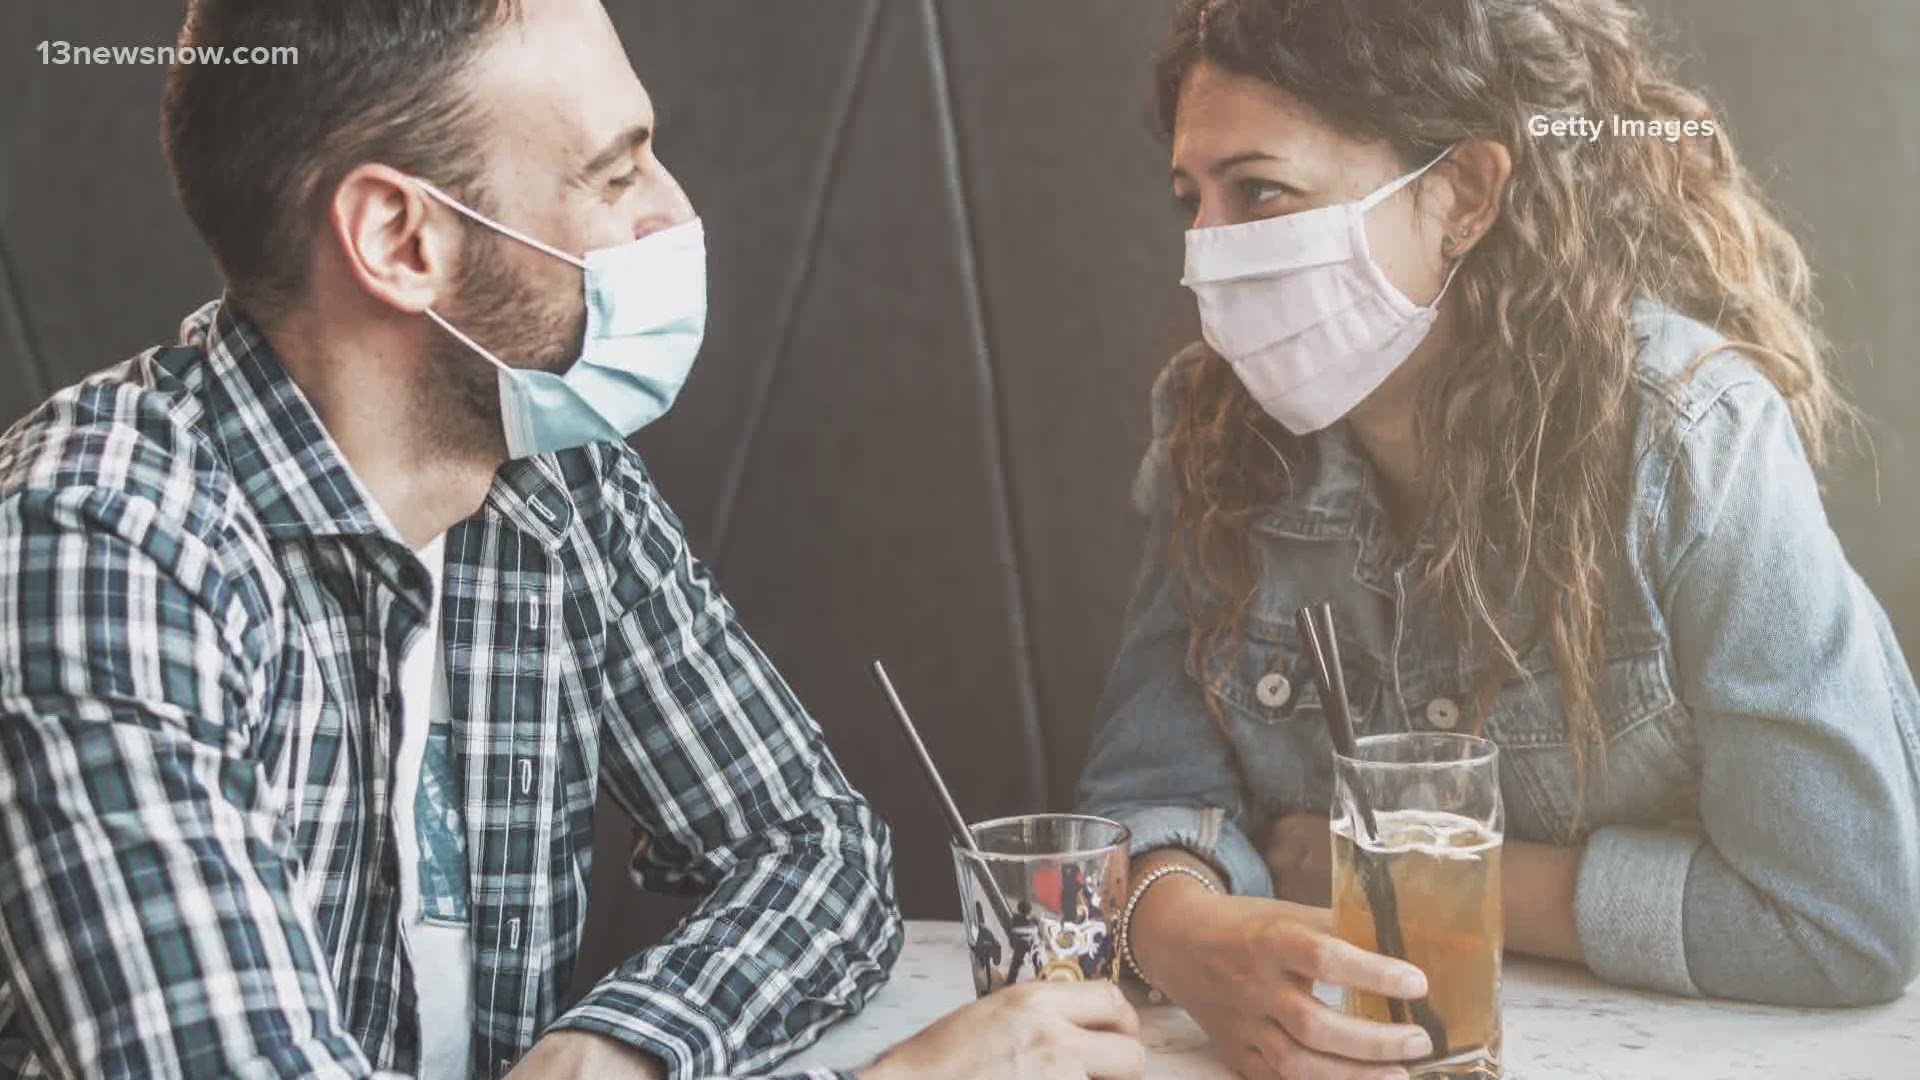 Experts say dating is not canceled during the pandemic.